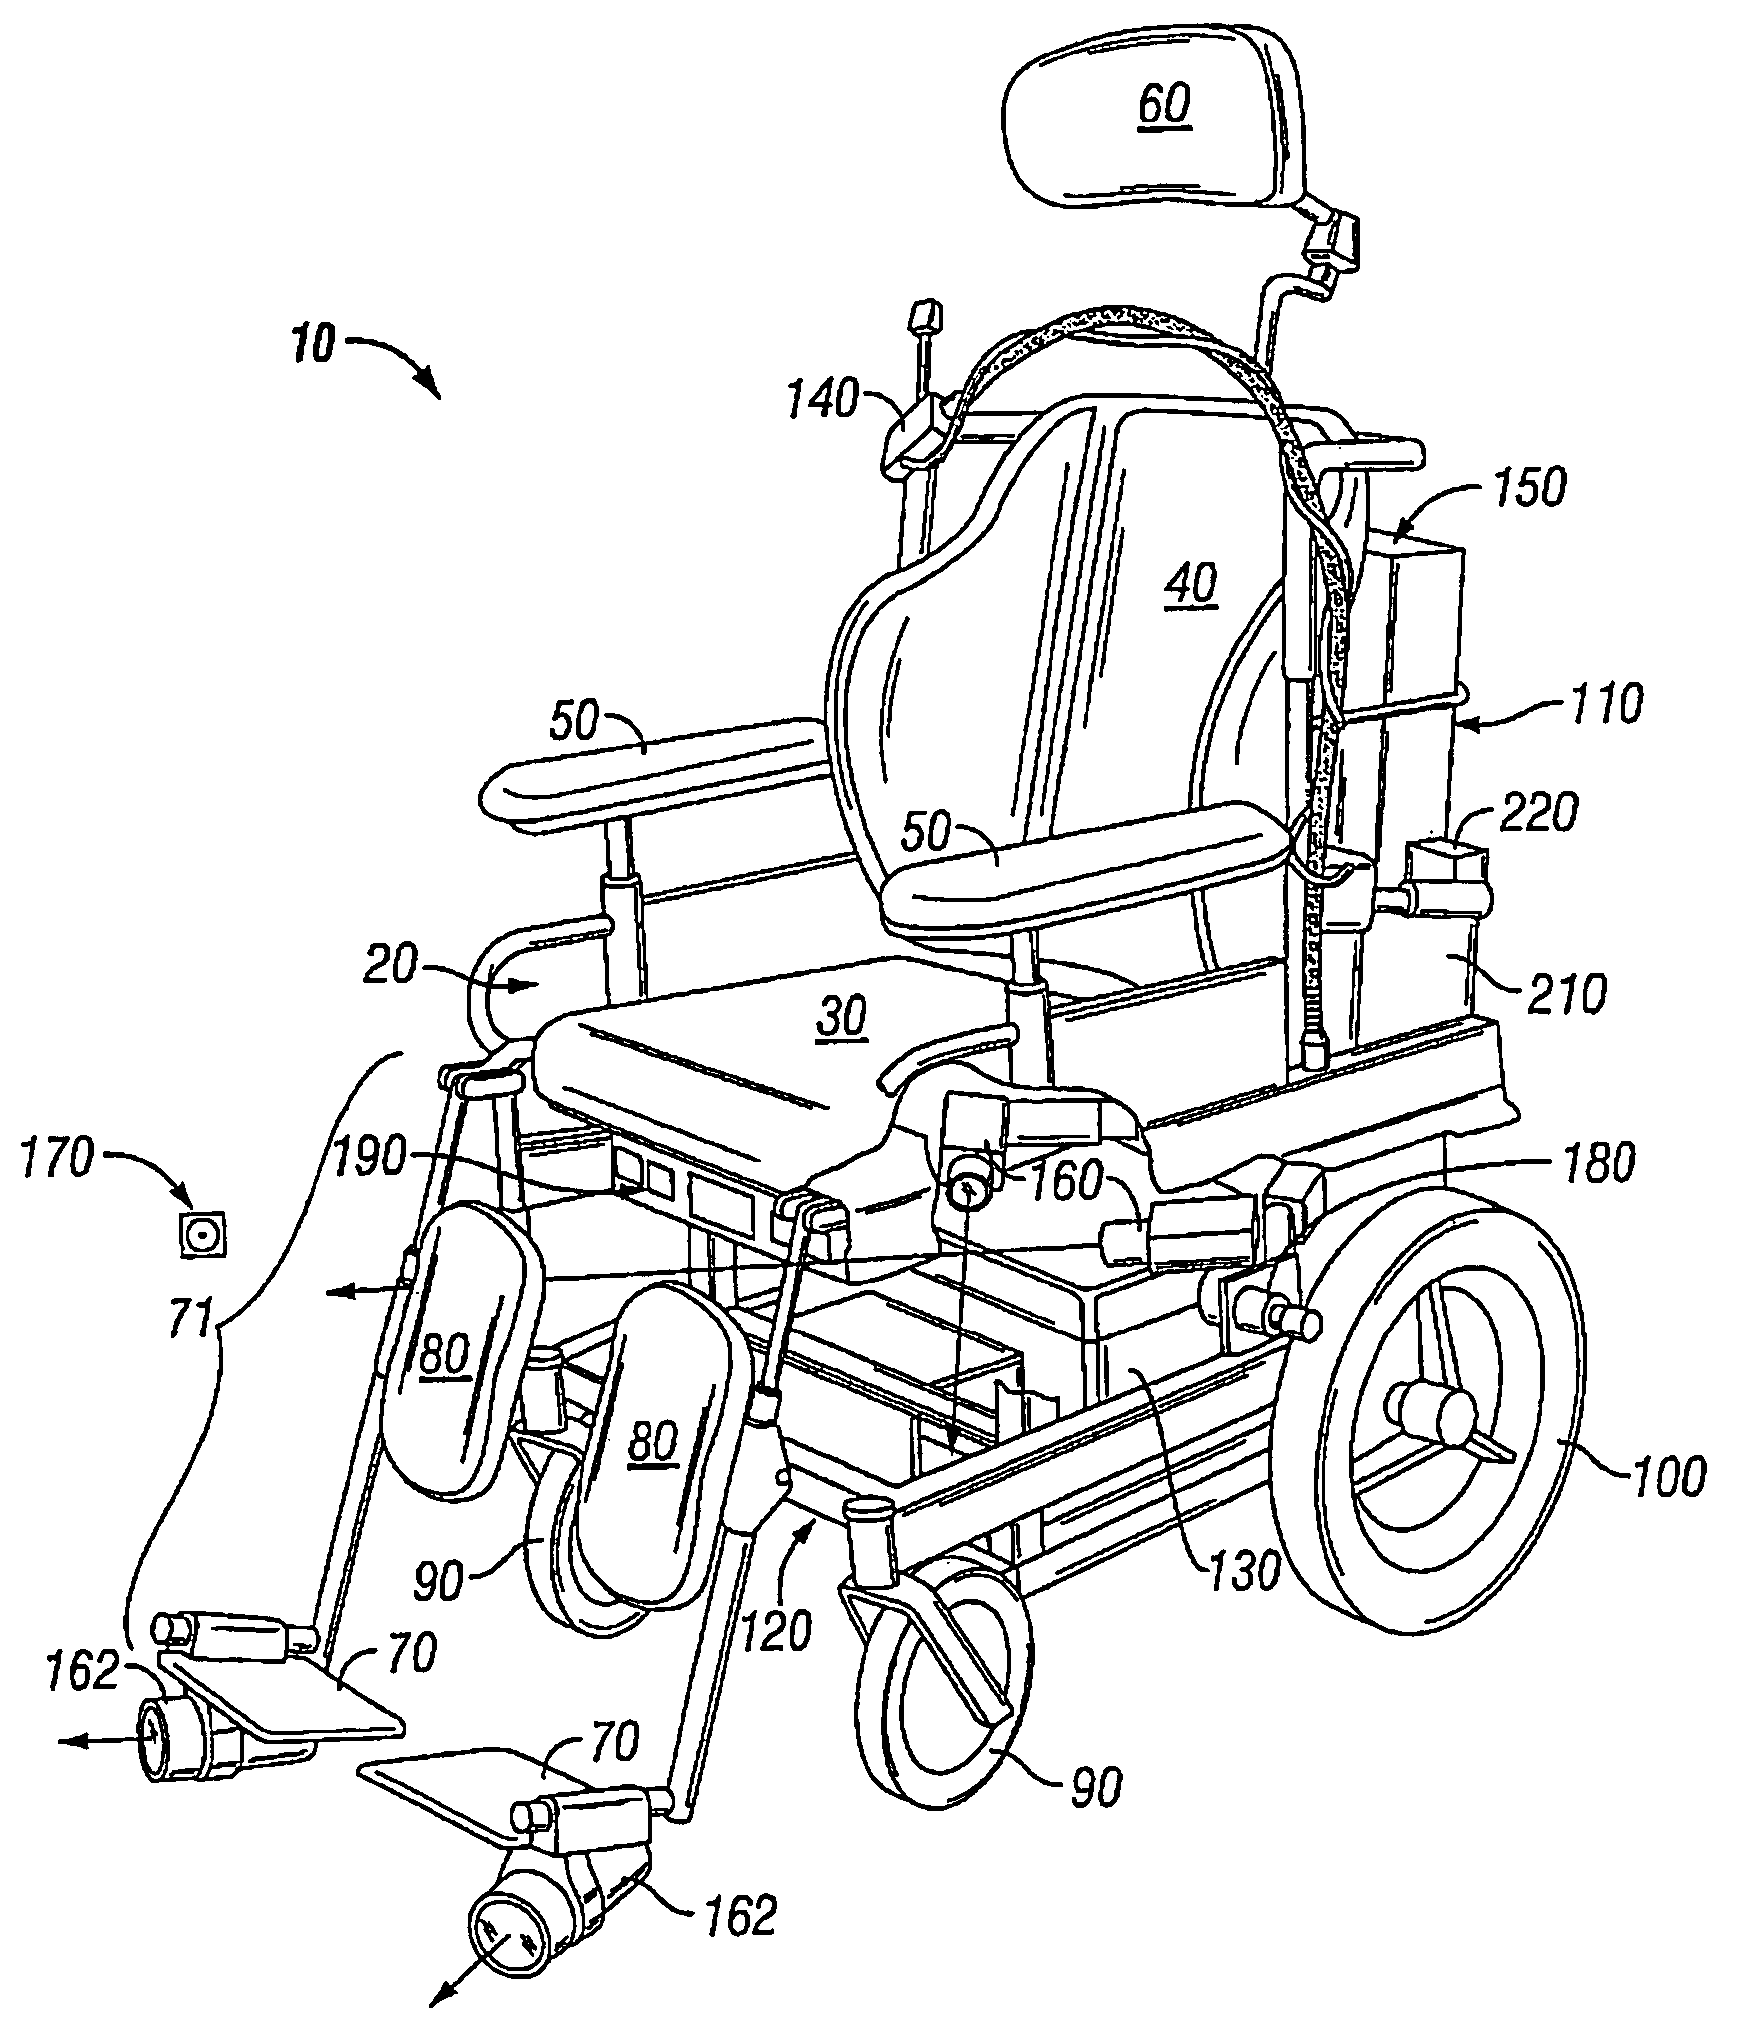 Computer-controlled power wheelchair navigation system